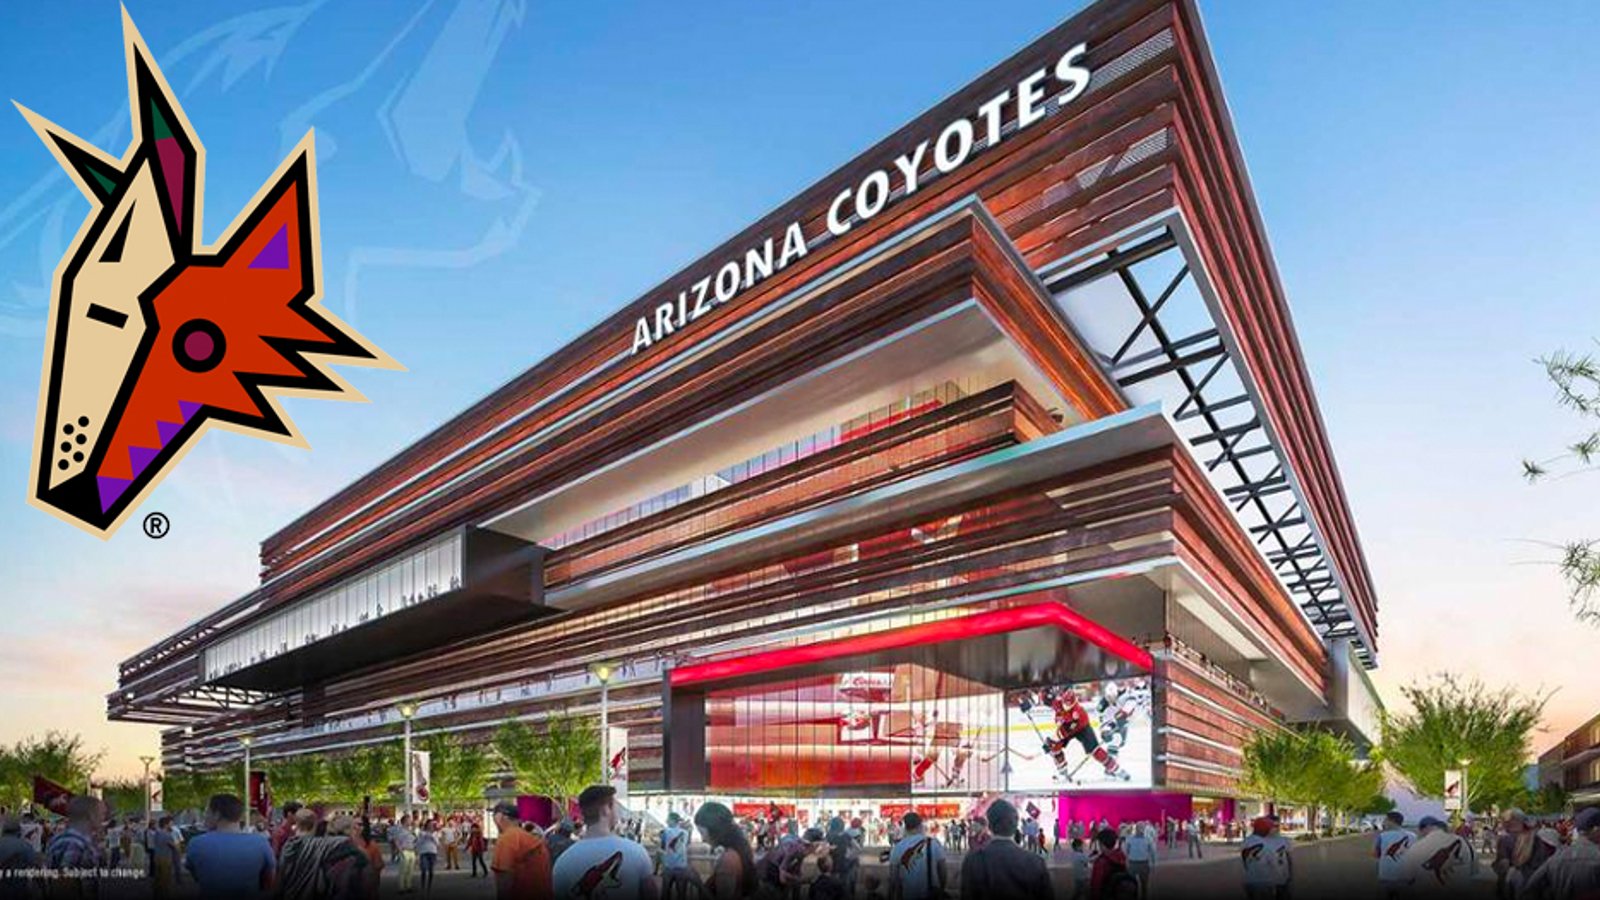 Report: Coyotes will have their final option to remain in Arizona rejected